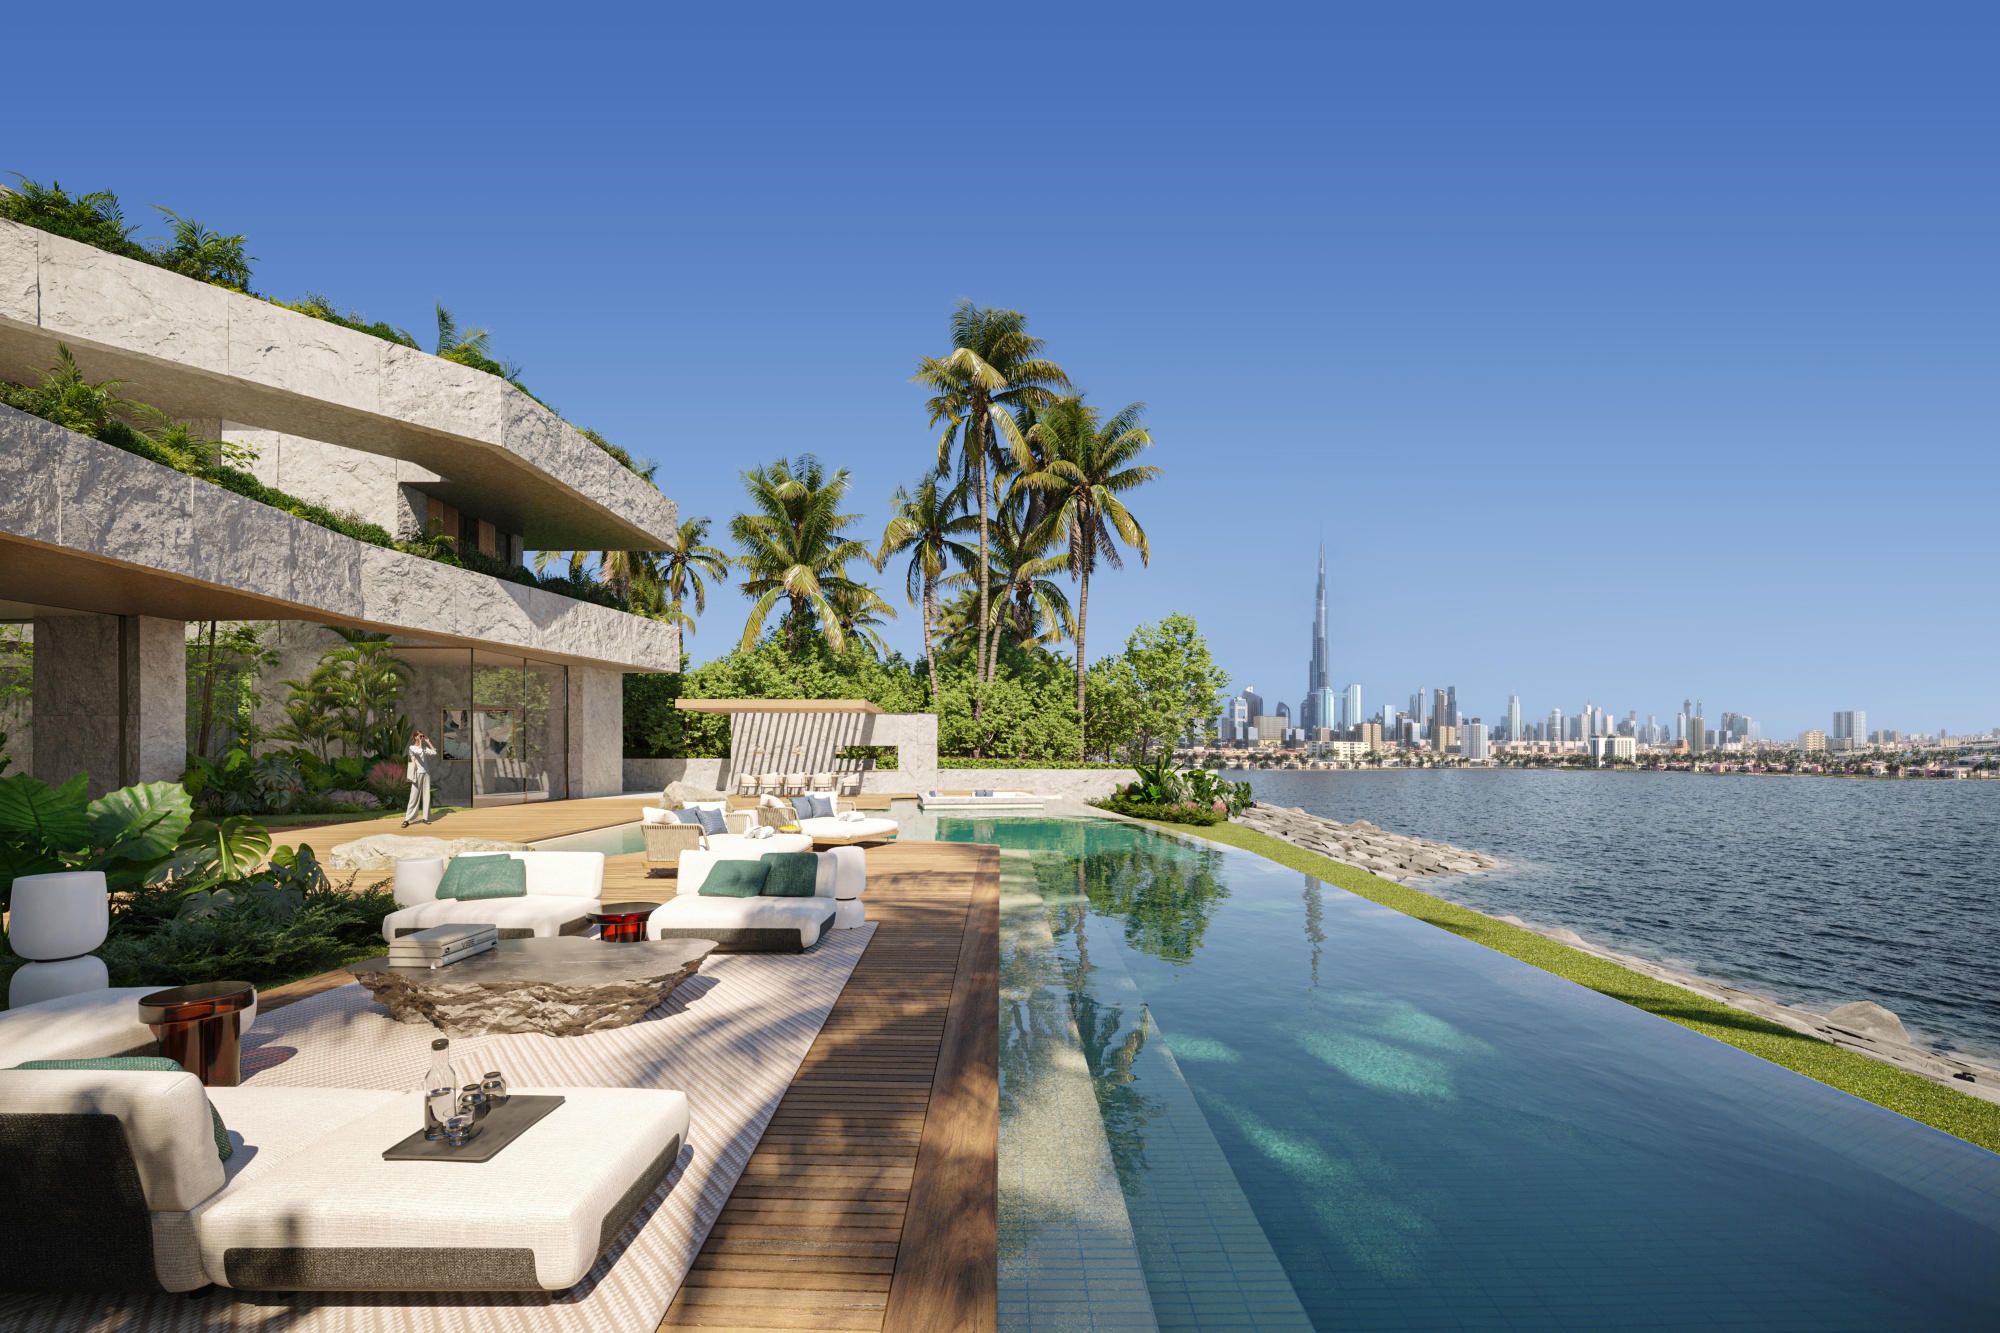 Billionaires Island Draws Super Rich to Secluded Dubai Enclave - Bloomberg